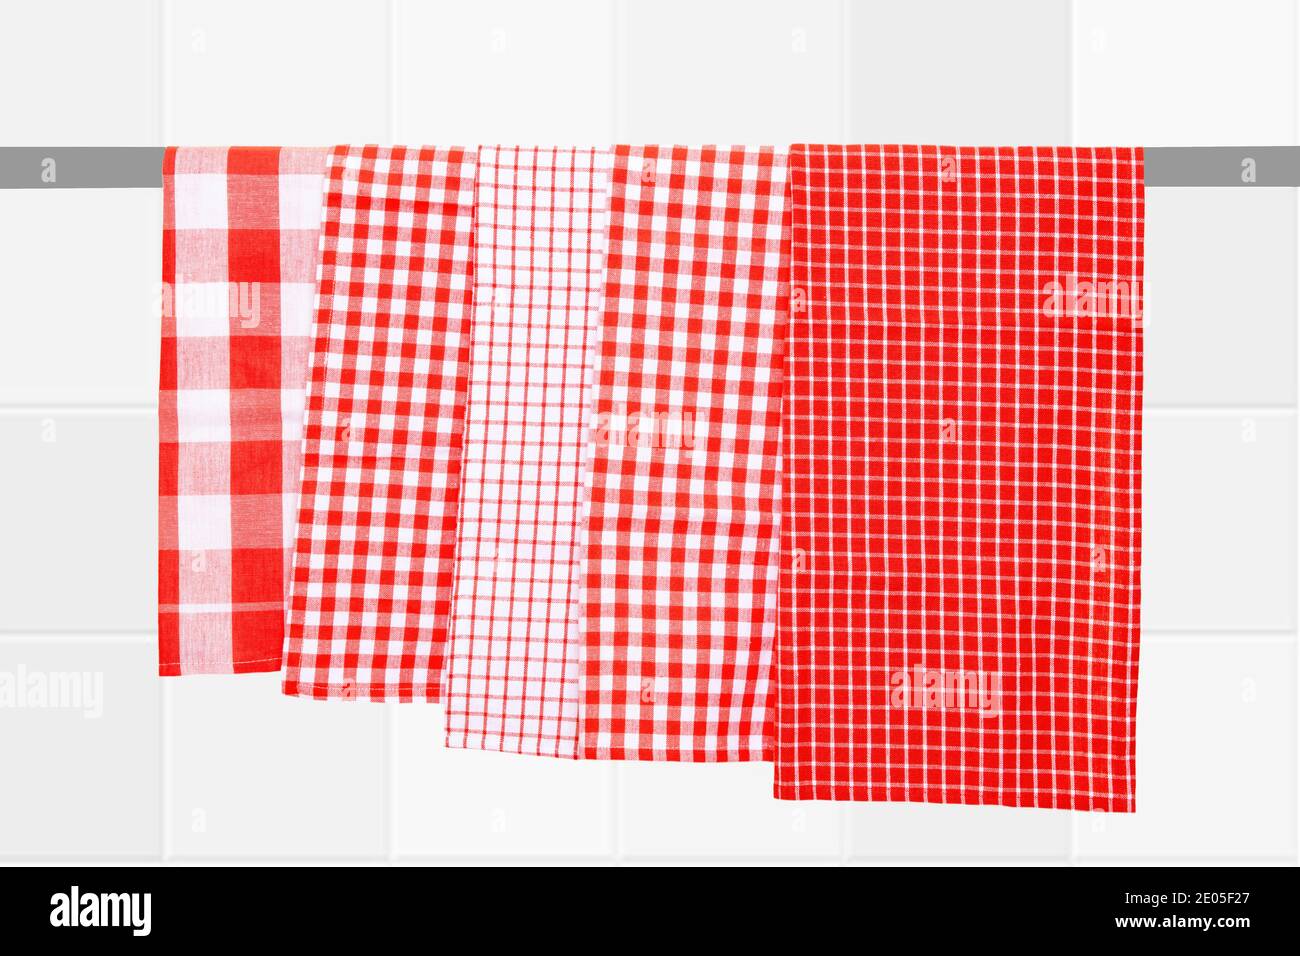 https://c8.alamy.com/comp/2E05F27/closeup-of-various-red-checkered-kitchen-towels-hang-on-a-clothes-rail-against-blurred-bright-tile-background-2E05F27.jpg